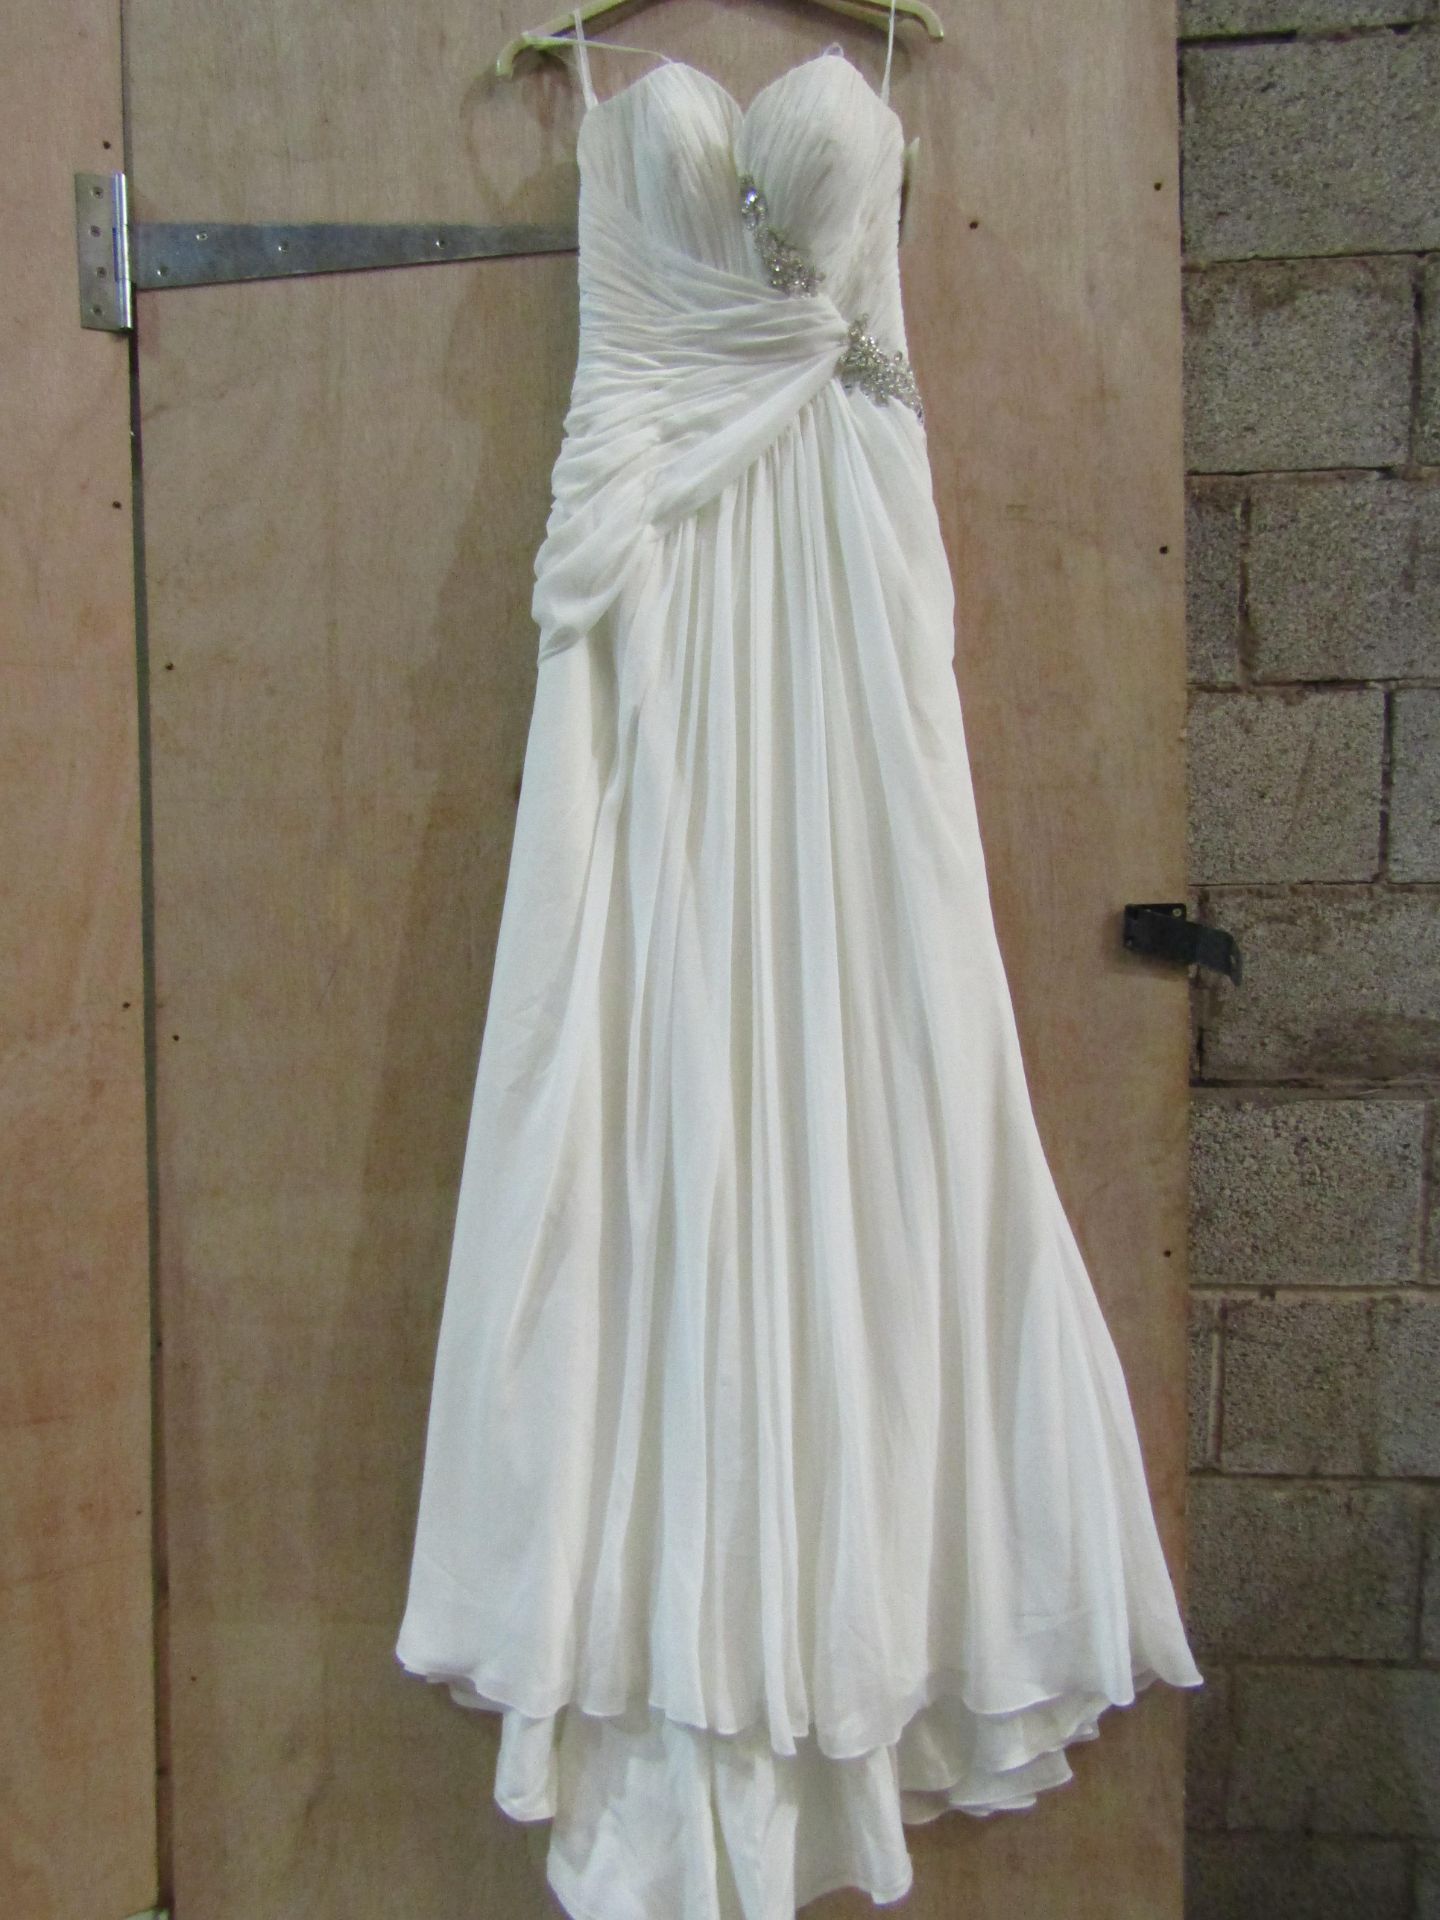 Approx 500 pieces of wedding shop stock to include wedding dresses, mother of the bride, dresses, - Image 70 of 71